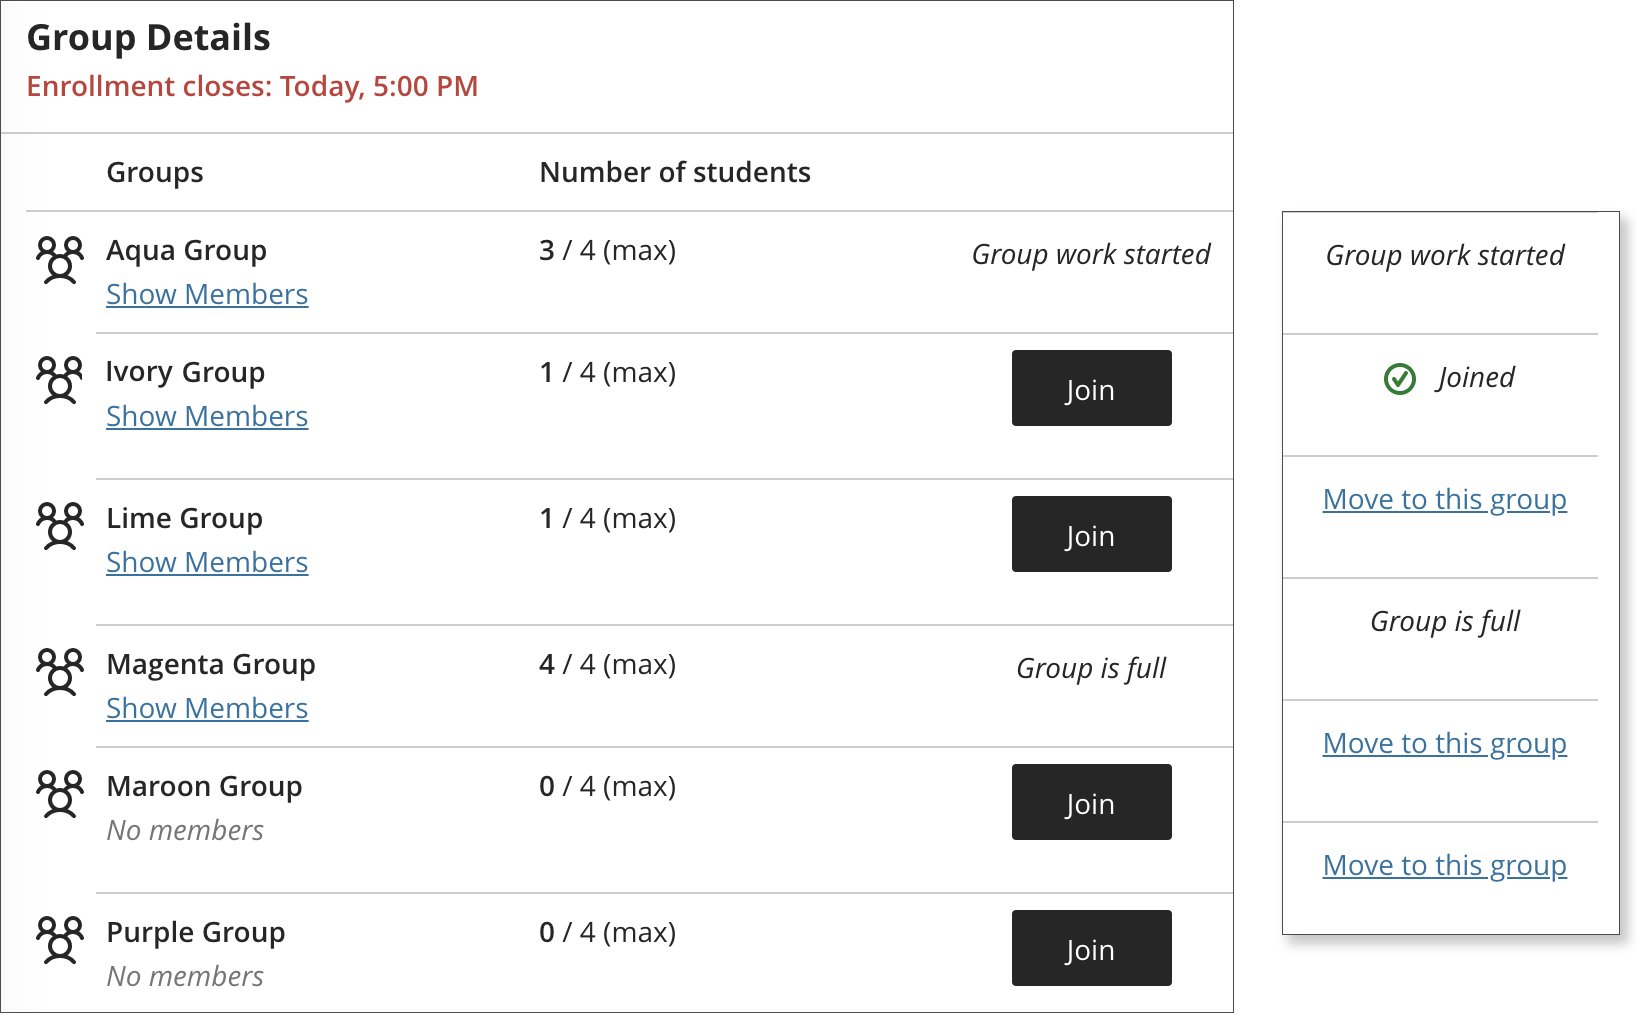 On the left, the student's Group details section is open with the list of self-enrollment groups available to join. On the right, the list of self-enrollment groups shows 1) the message "Joined" in one group and 2) the option "Move to this group" in the groups available to join.